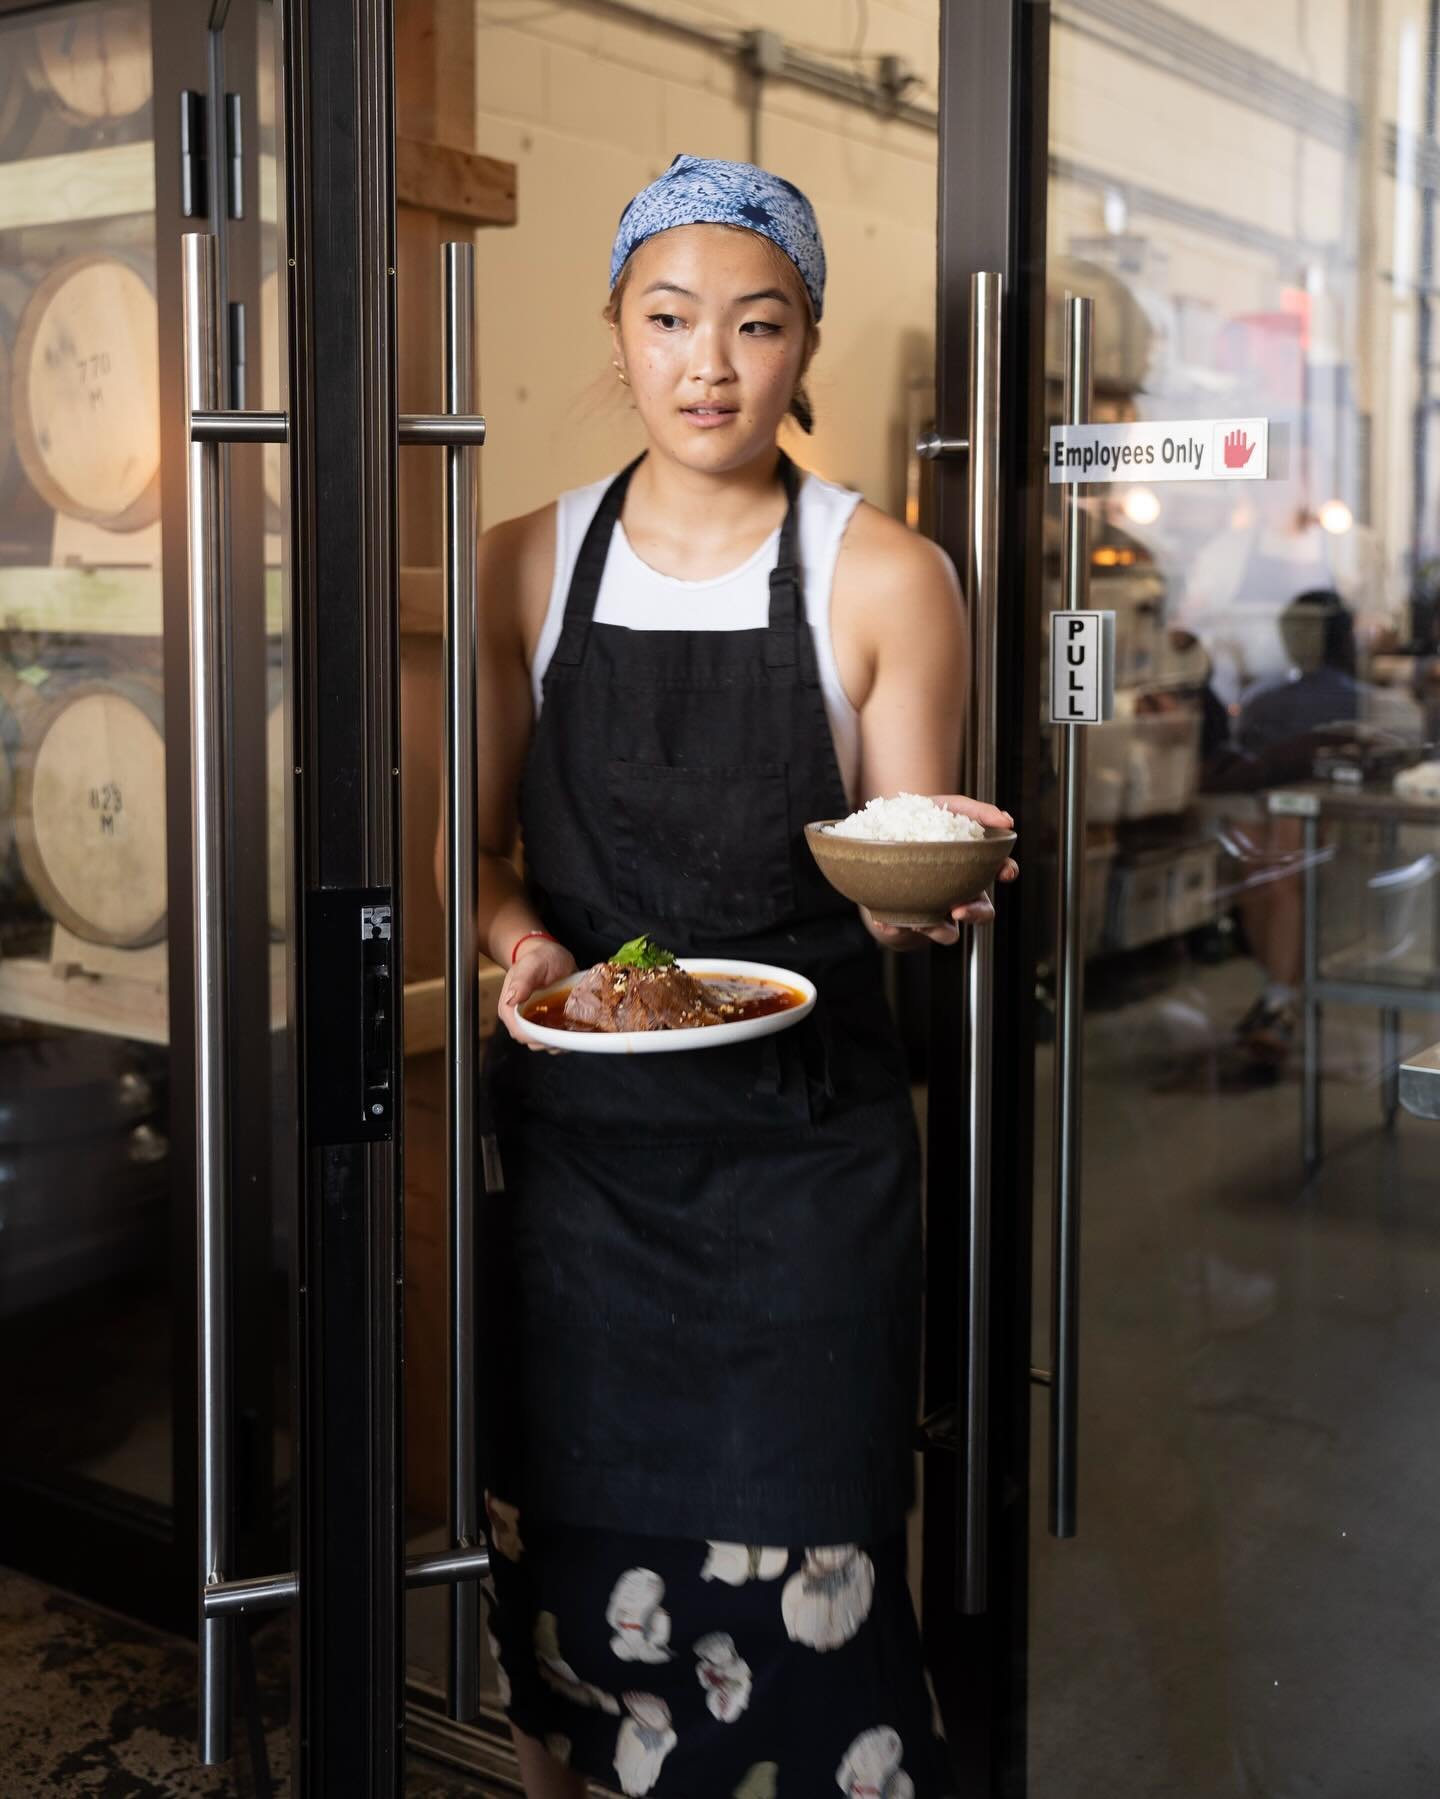 Excited to share that Charlene Luo @charleneluo, founder of @thebaodega will be joining Thu Pham Buser @thubuser &amp; Carol Pak @caroljpak of @drinkmakku for our 5/13 culinary industry night panel centered around celebrating culture through food and